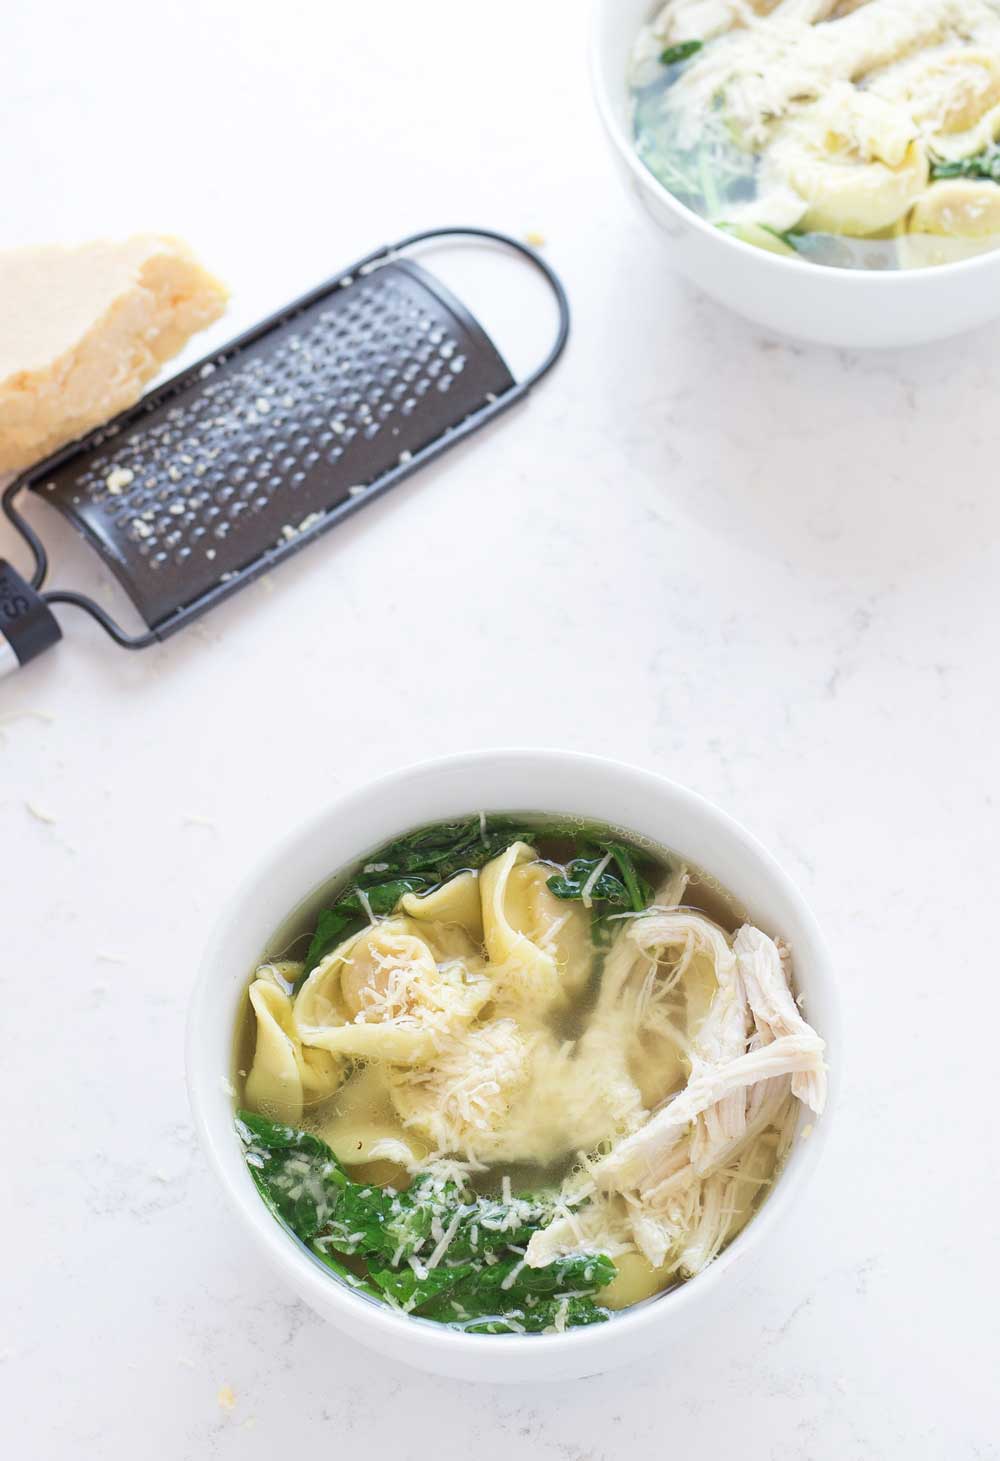 A filling chicken tortellini soup that is as easy to make as heating up a can of soup. But sooooo much better! Take a 2 minute dash around the supermarket and you can have dinner on the table in 10 minutes.